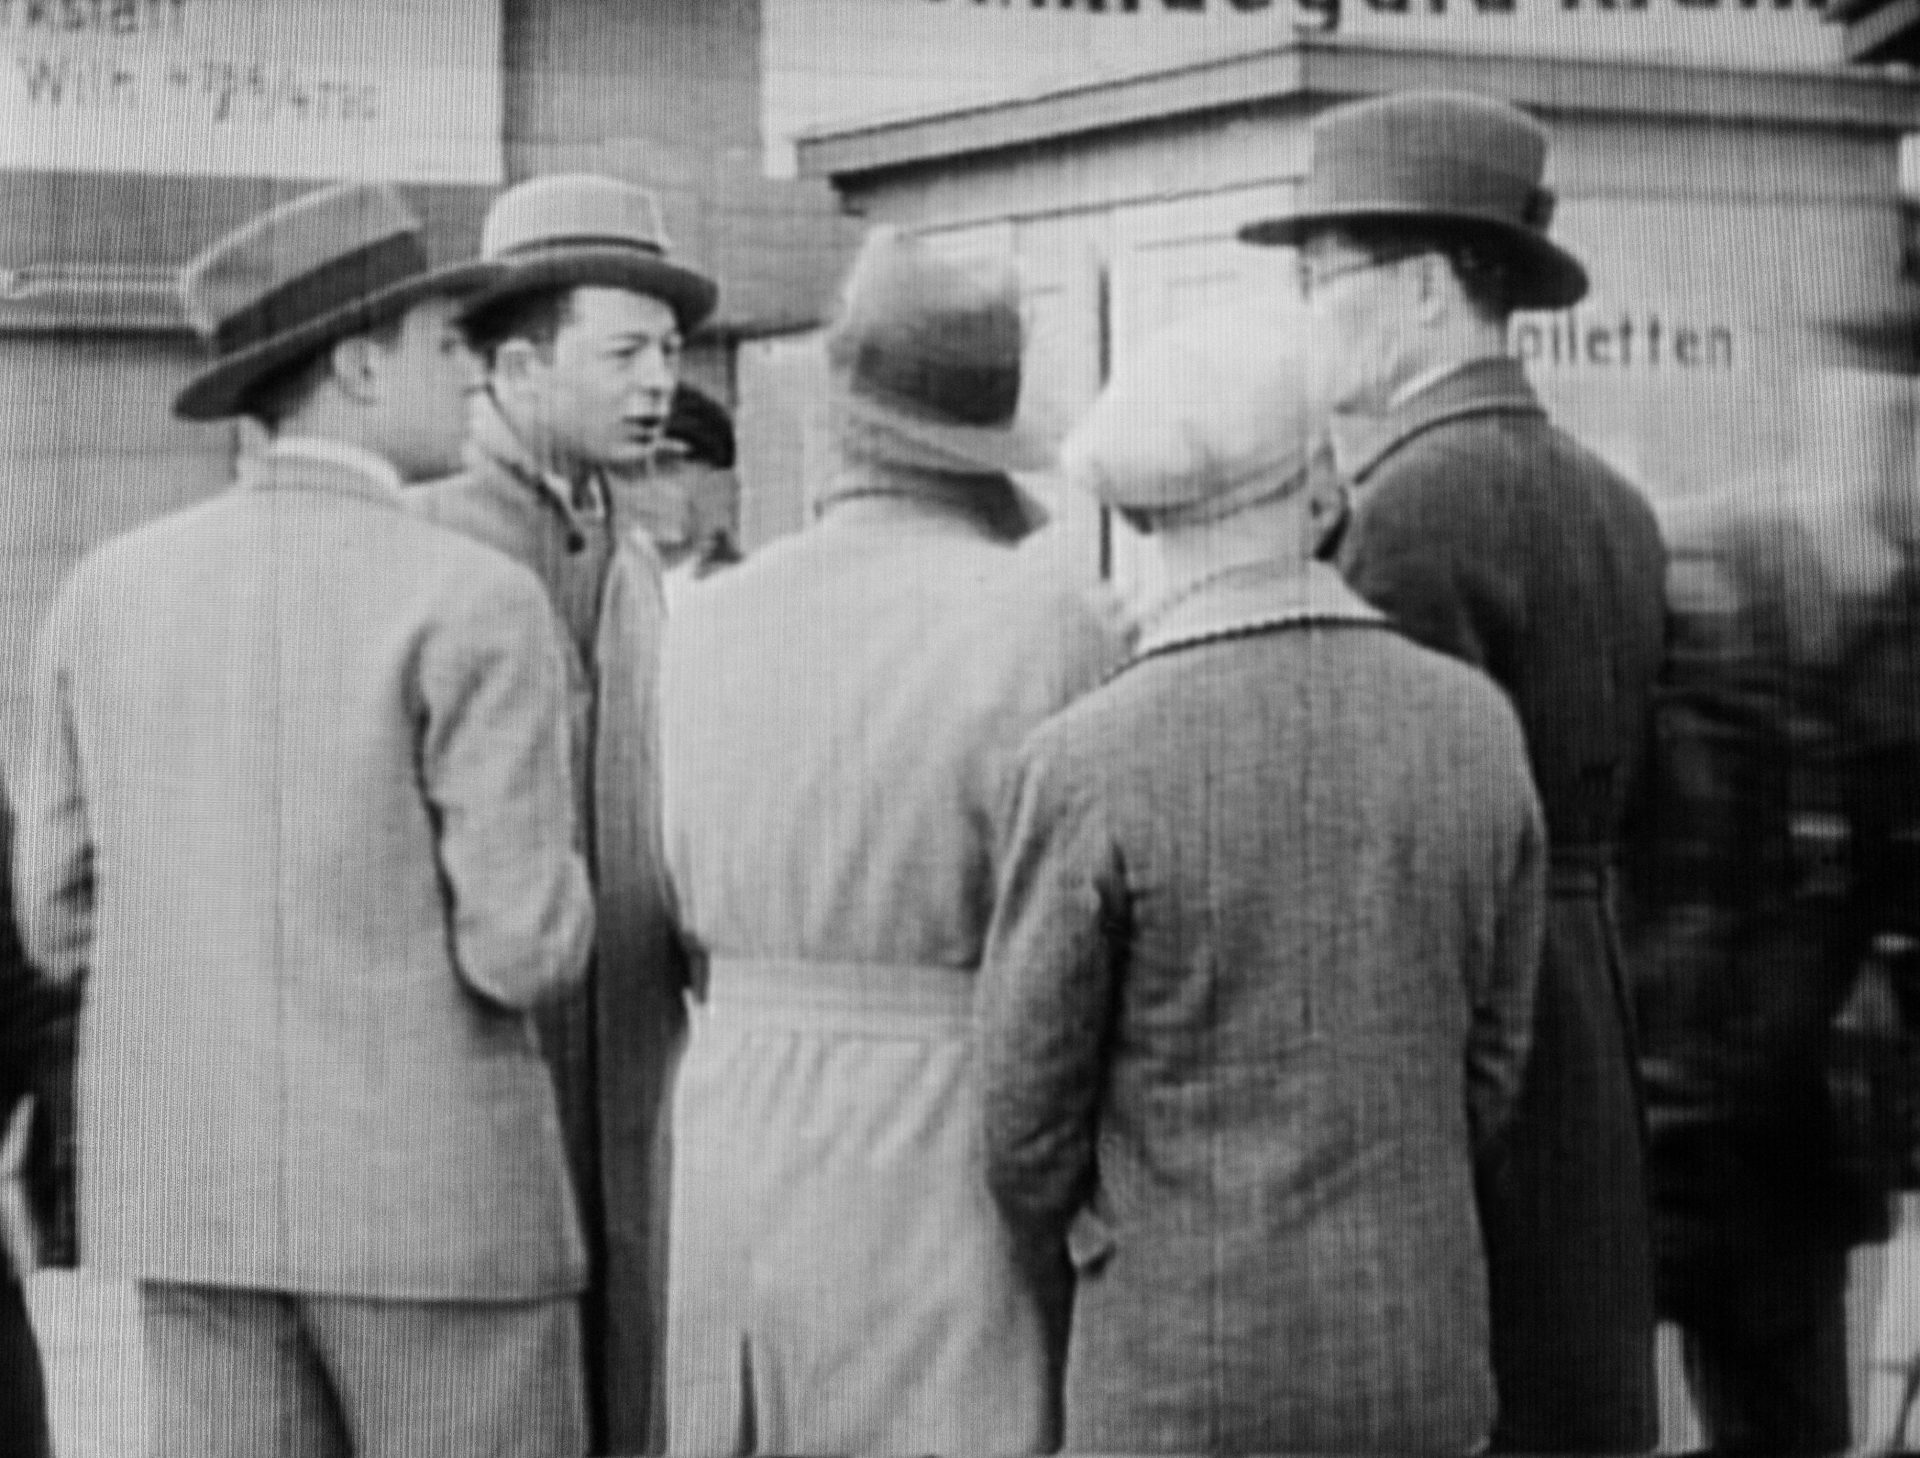 Billy Wilder appears in a cameo, second from left, in Der Teufelsreporter - The Daredevil Reporter - his first credited screenplay, from 1929. Photo: Filmarchiv Austria